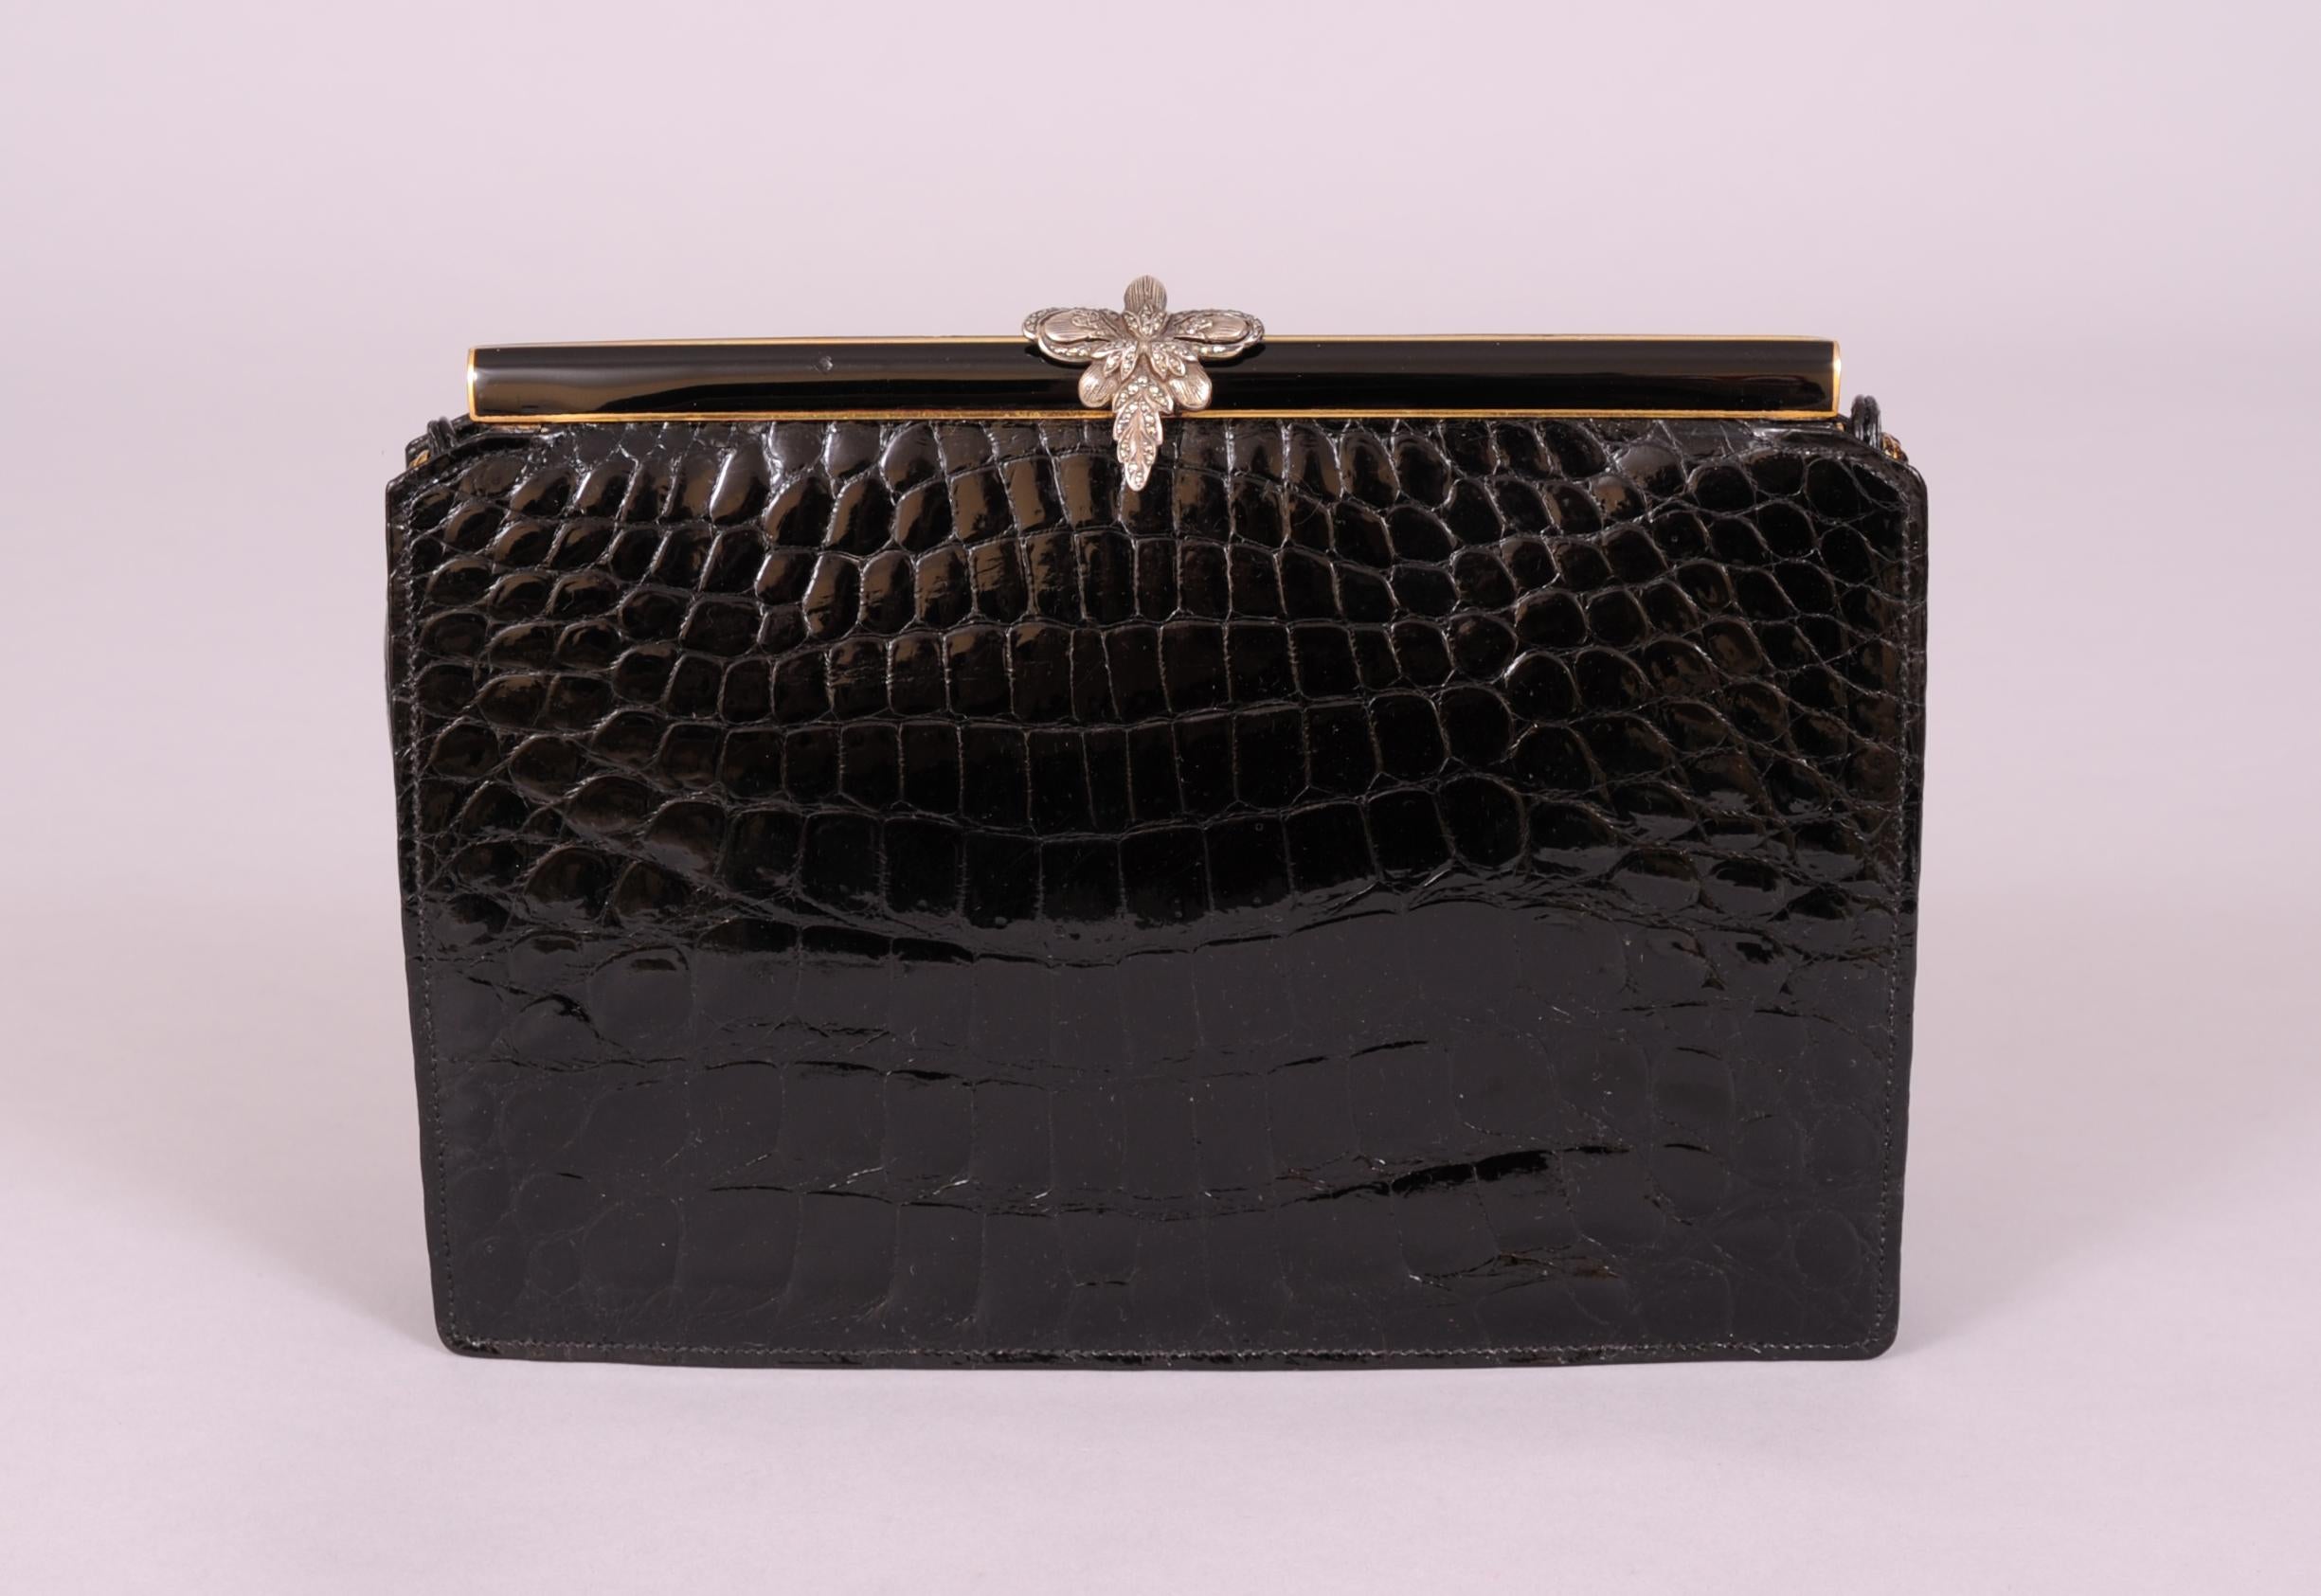 This stunning black crocodile evening bag is topped with a marcasite  set sterling silver clasp. The frame is black enamel over gold toned metal, front and back. The black crocodile skin is in pristine condition, as is the convertible handle. The